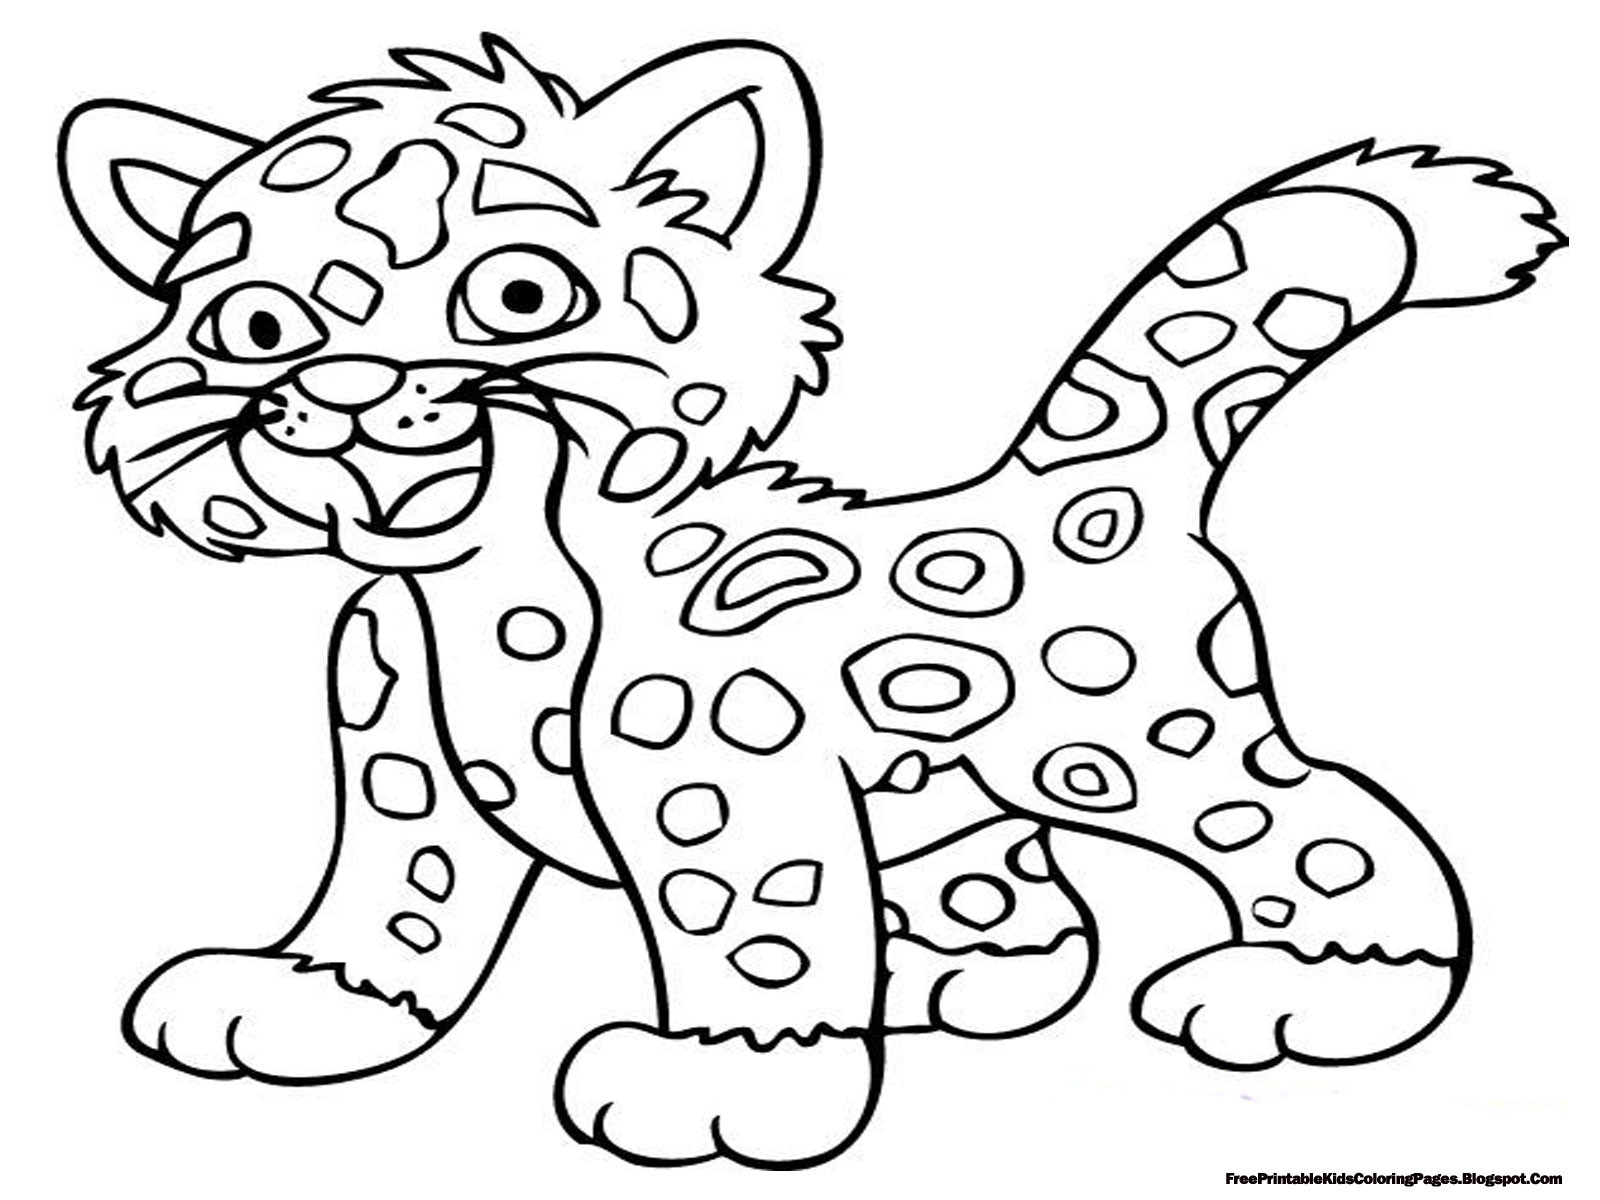 Awesome Coloring Pages For Kids
 Awesome Coloring Pages Printables Ideas For Yo 6619 Unknown